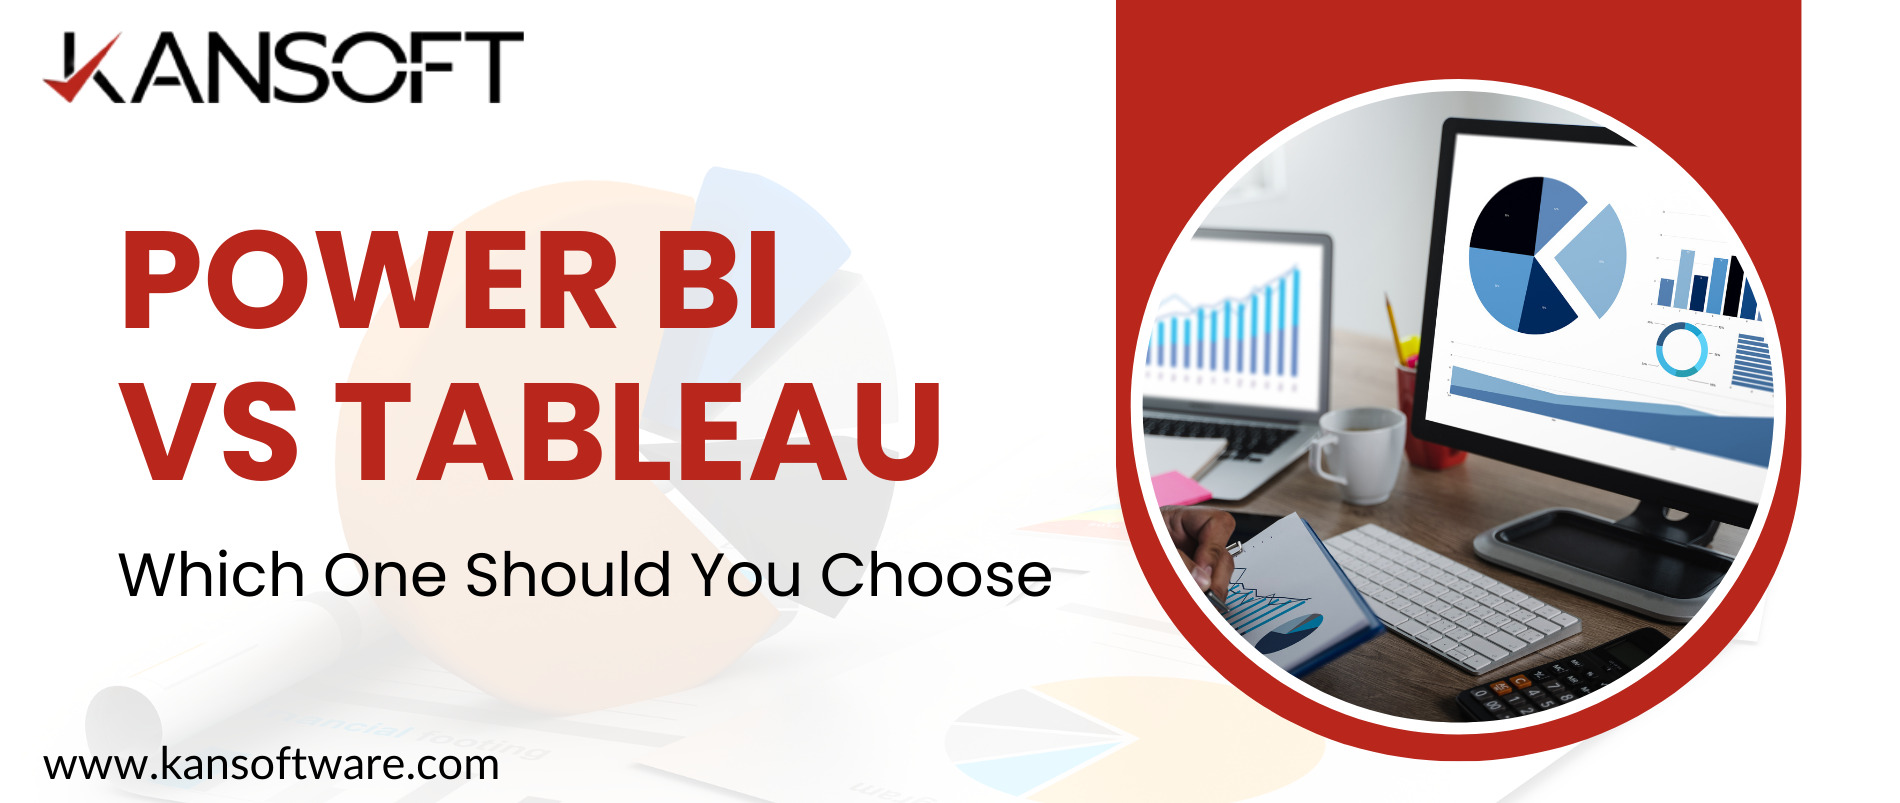 Power BI vs Tableau: Choosing the Right Business Intelligence Tool for Your Needs